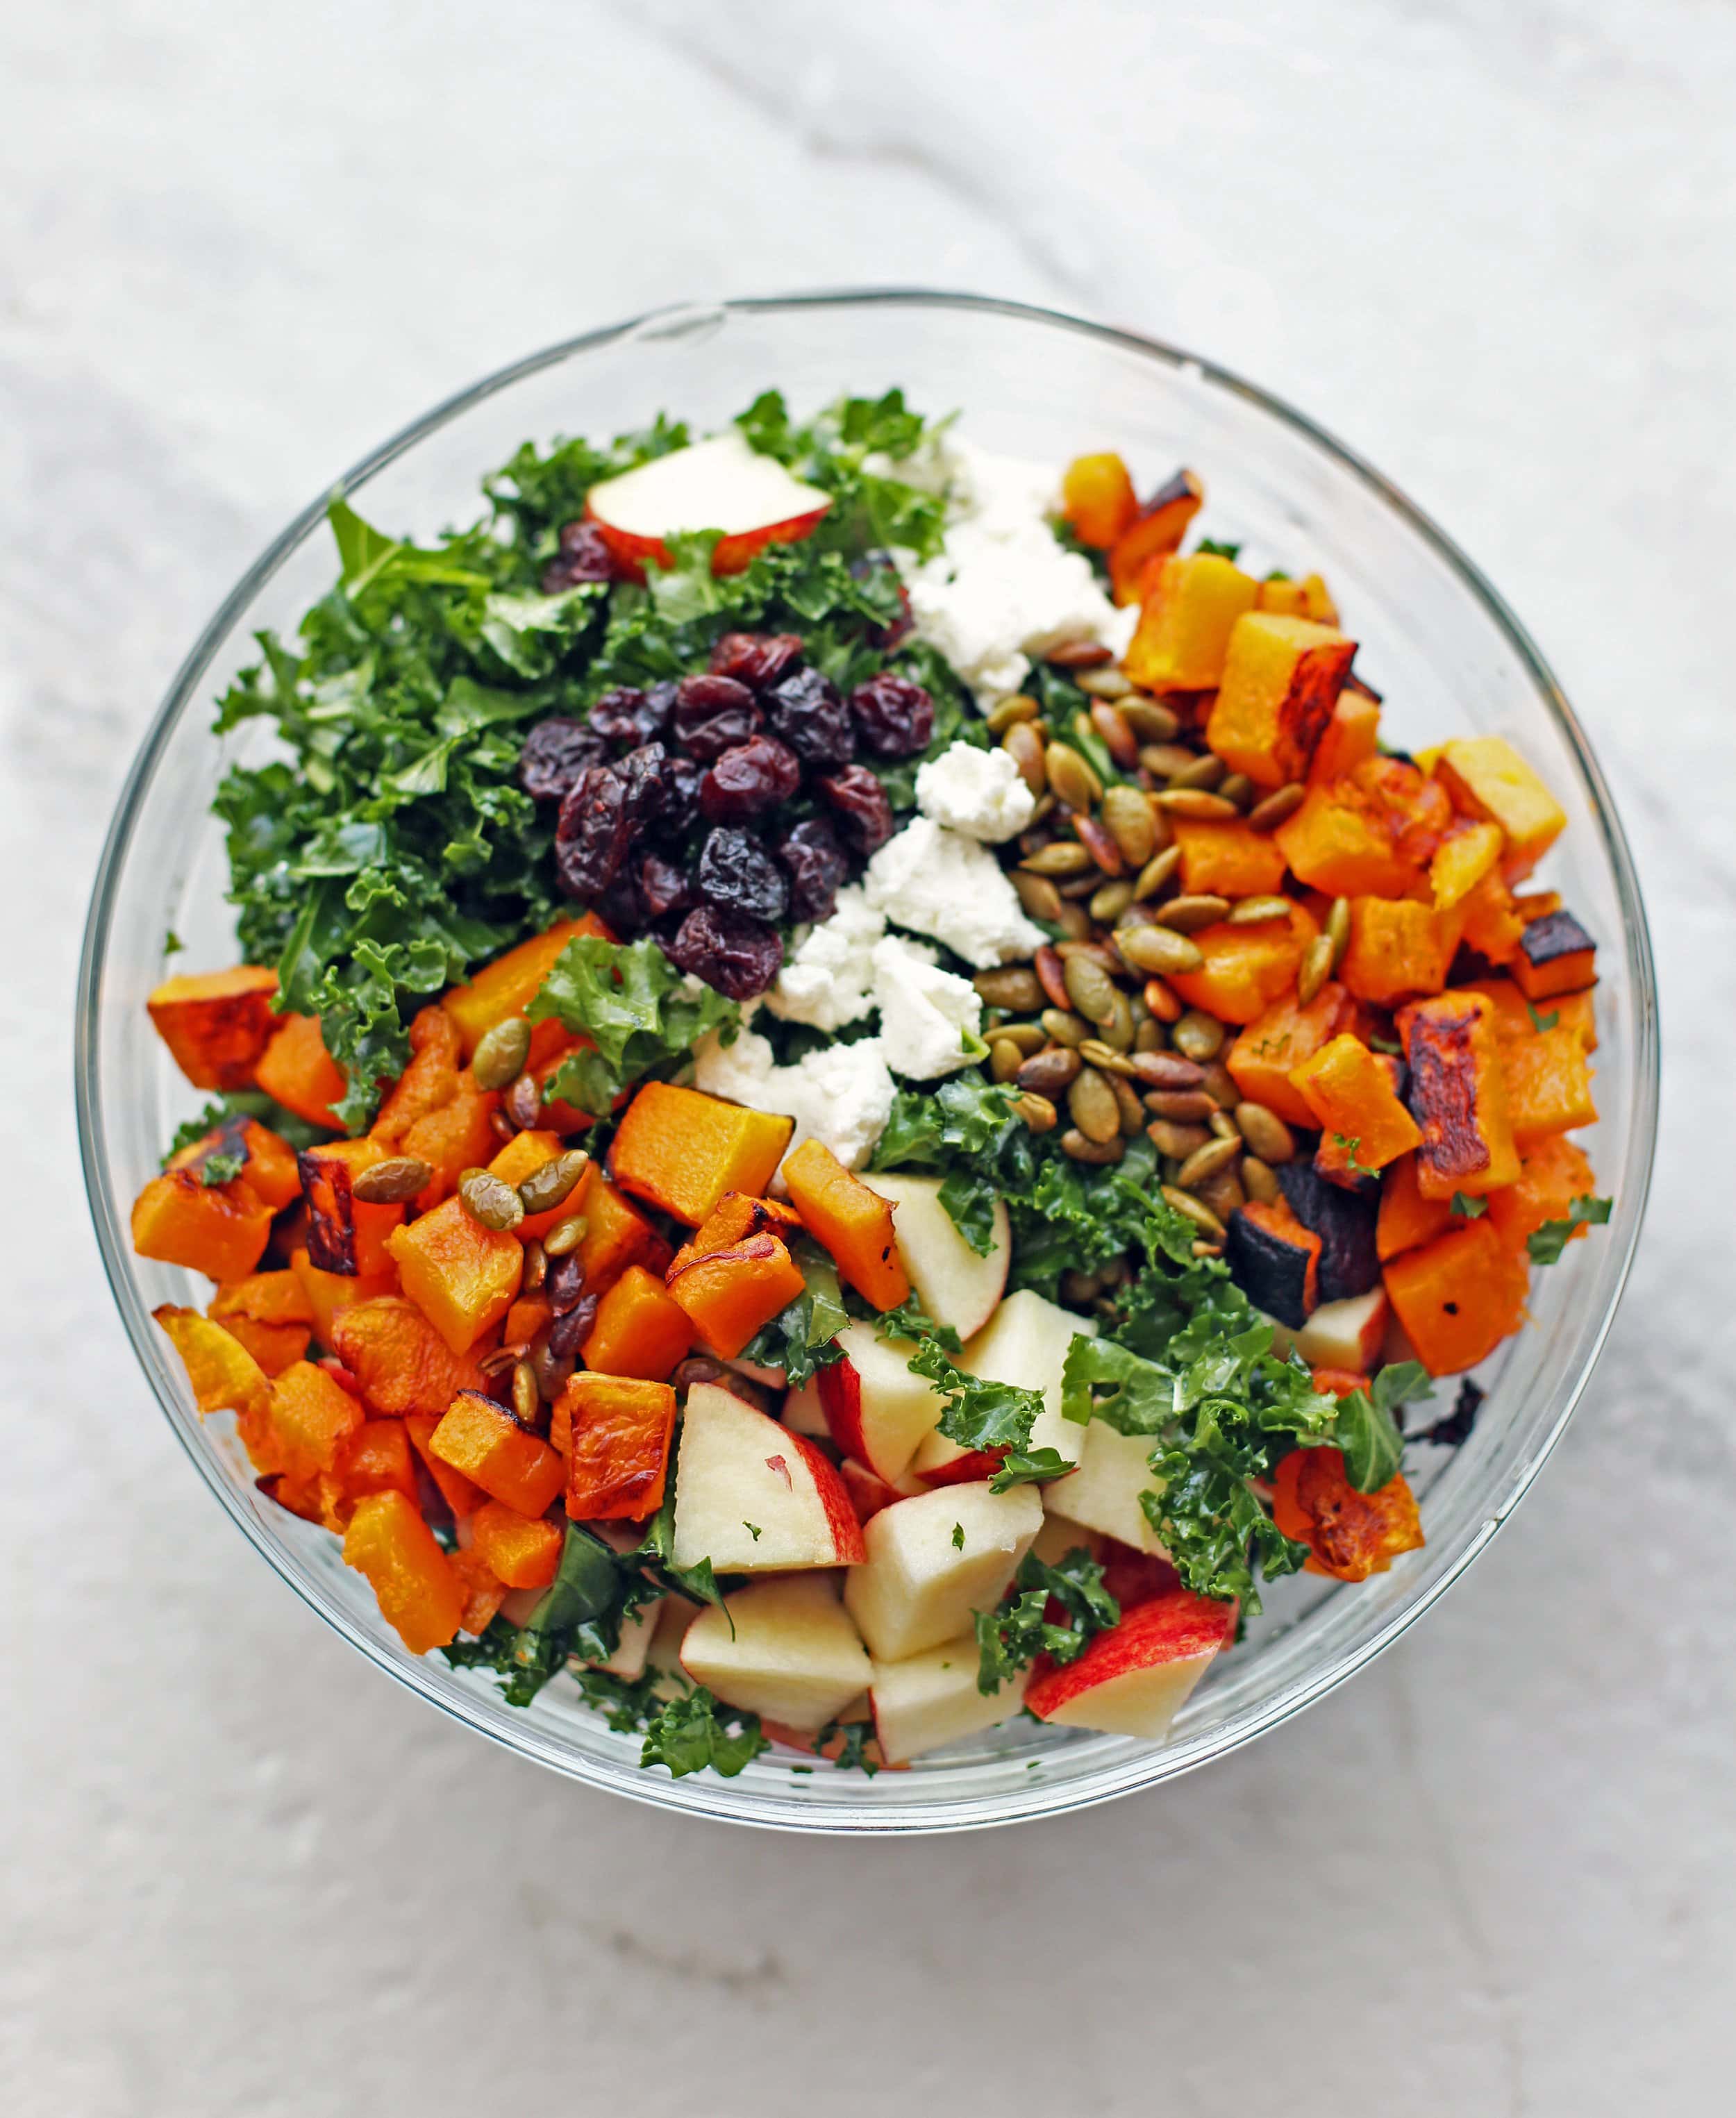 A bowl filled with kale, apples, roasted butternut squash, goat cheese, dried cherries, and pumpkin seeds.